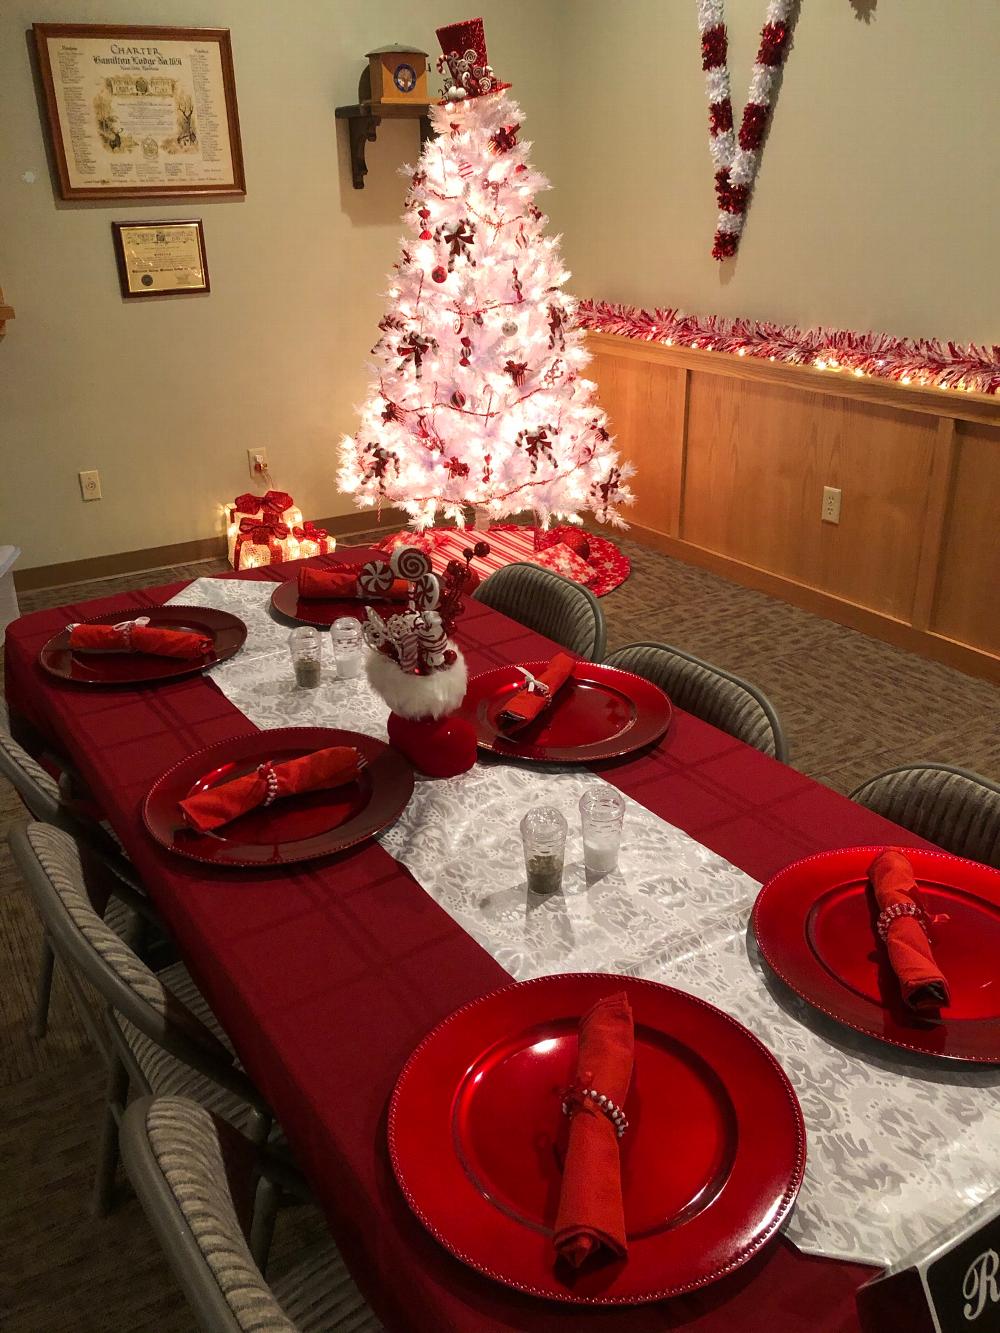 Table settings for special events, like Christmas.